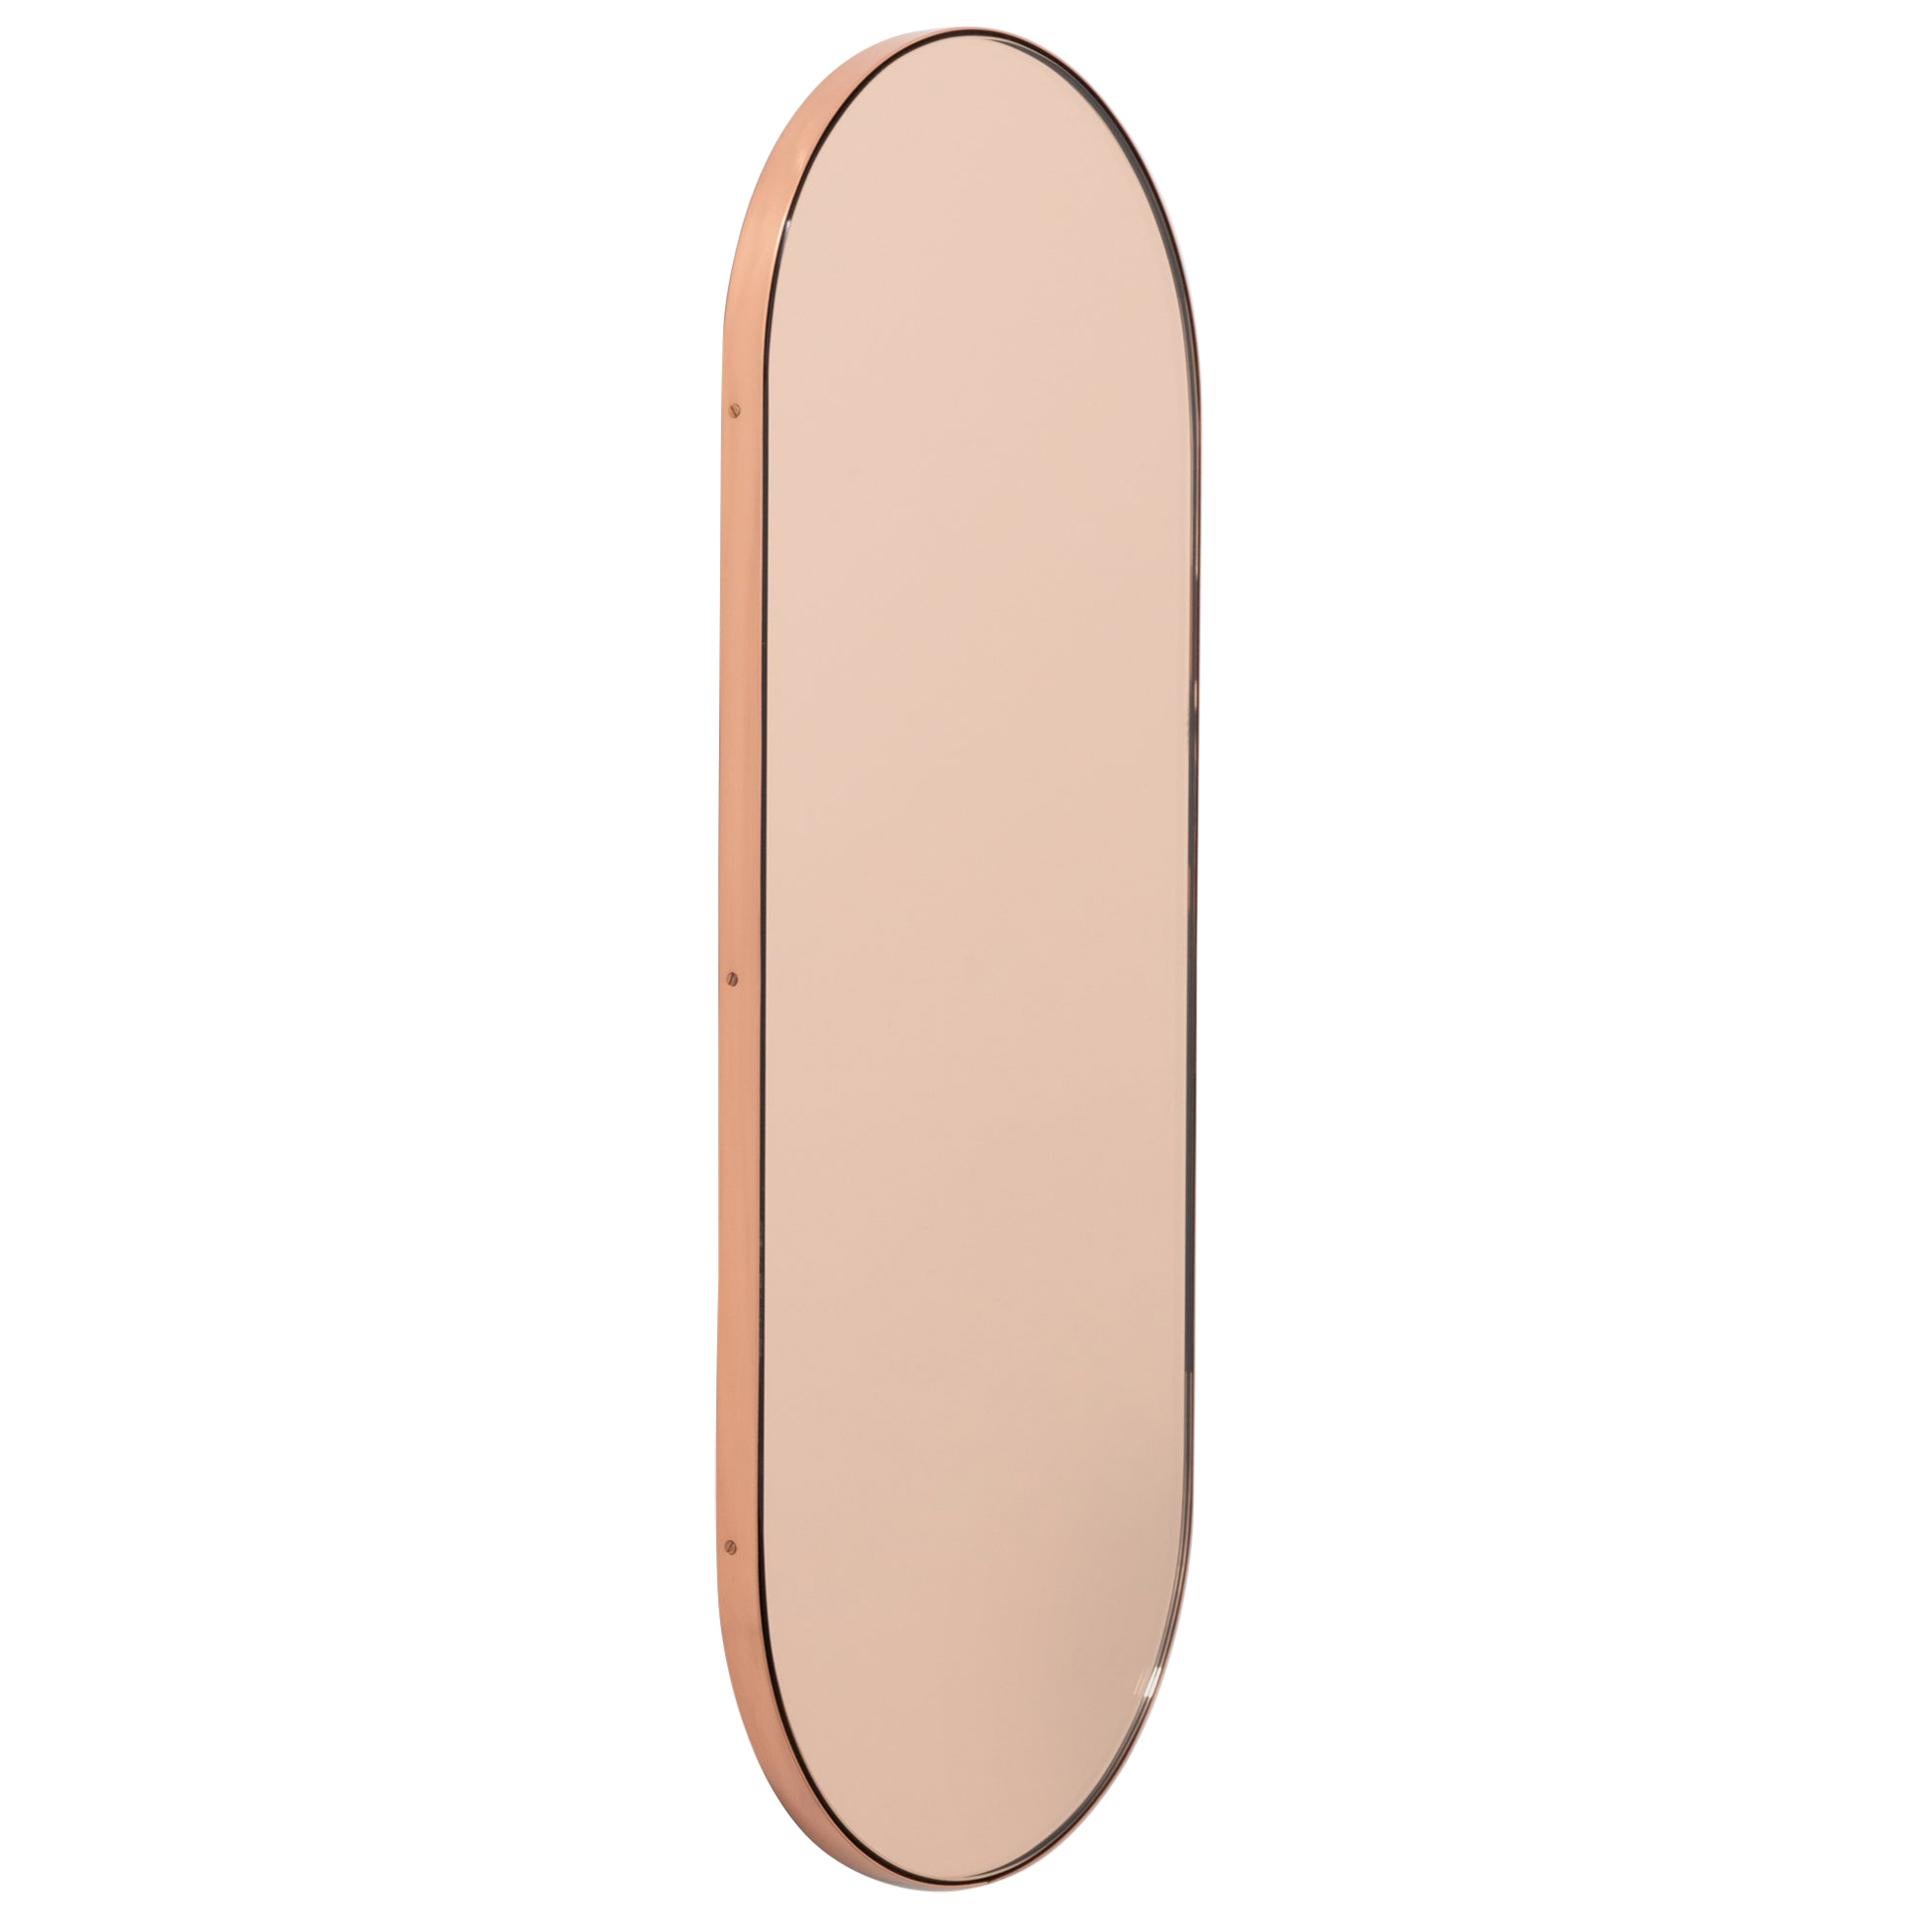 Capsula Capsule Pill Shaped Rose Gold Decorative Mirror with Copper Frame, Small For Sale